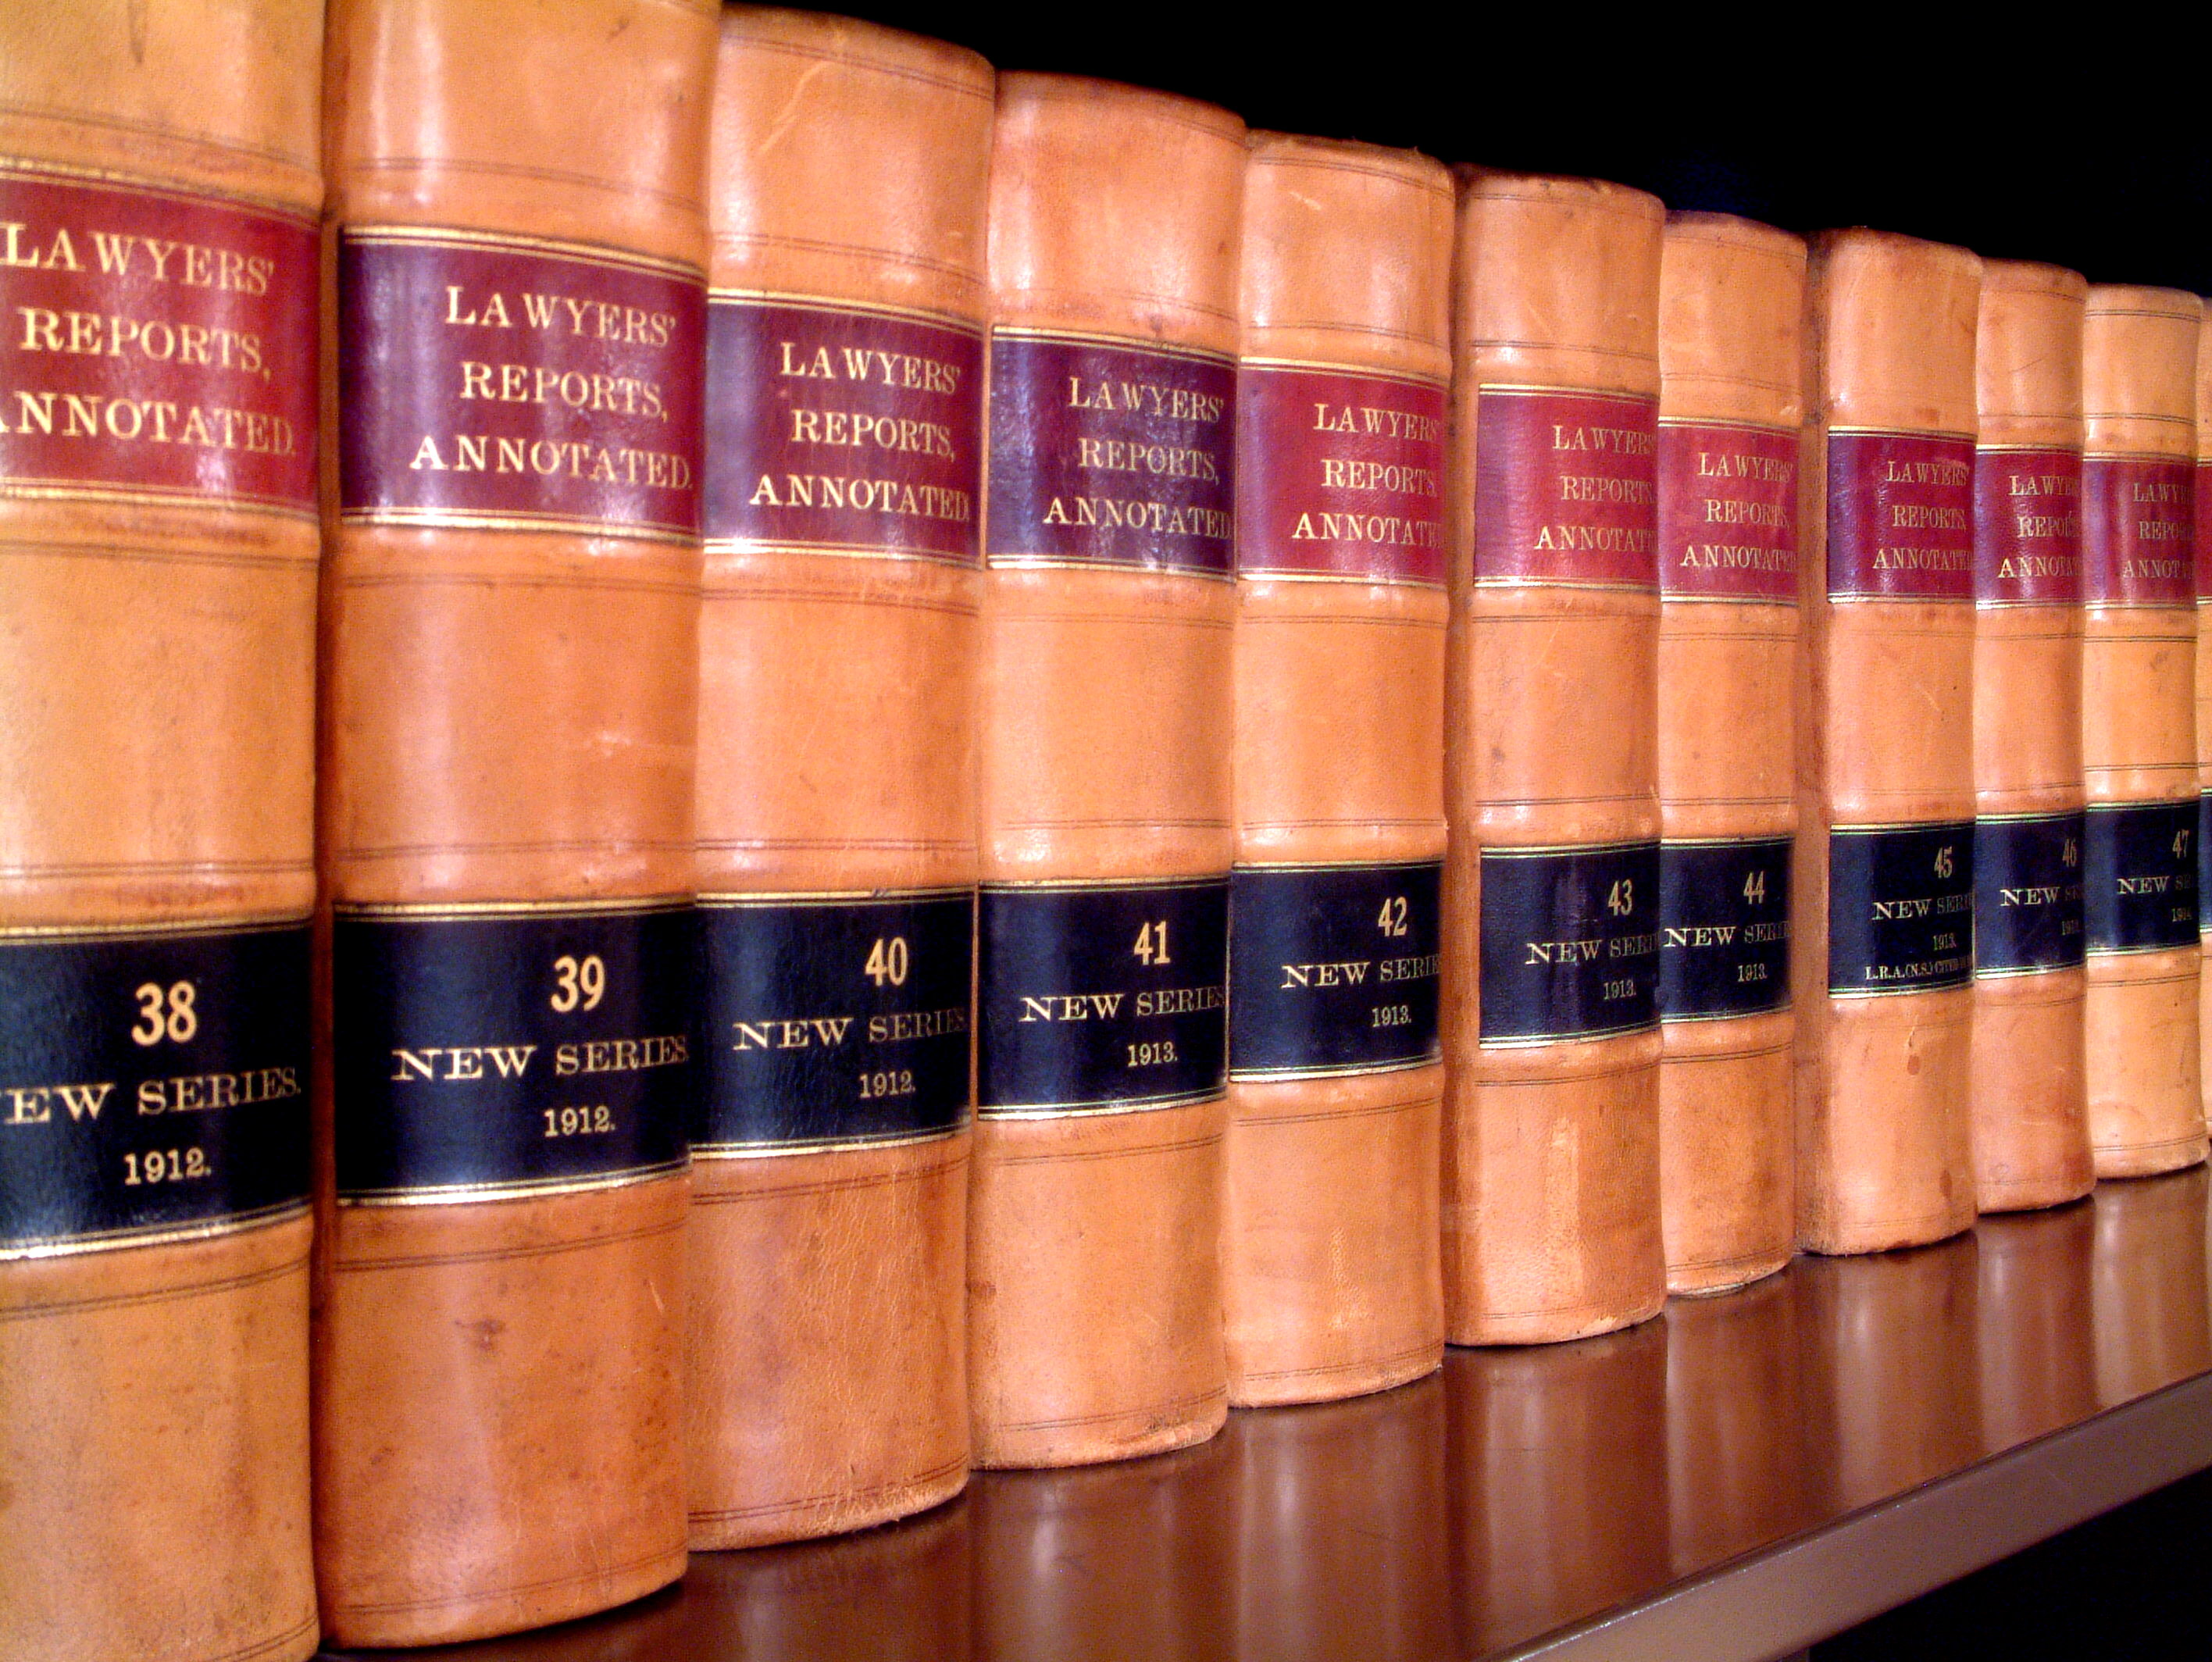 law-books-lawyer-treatise-legal-research.jpg